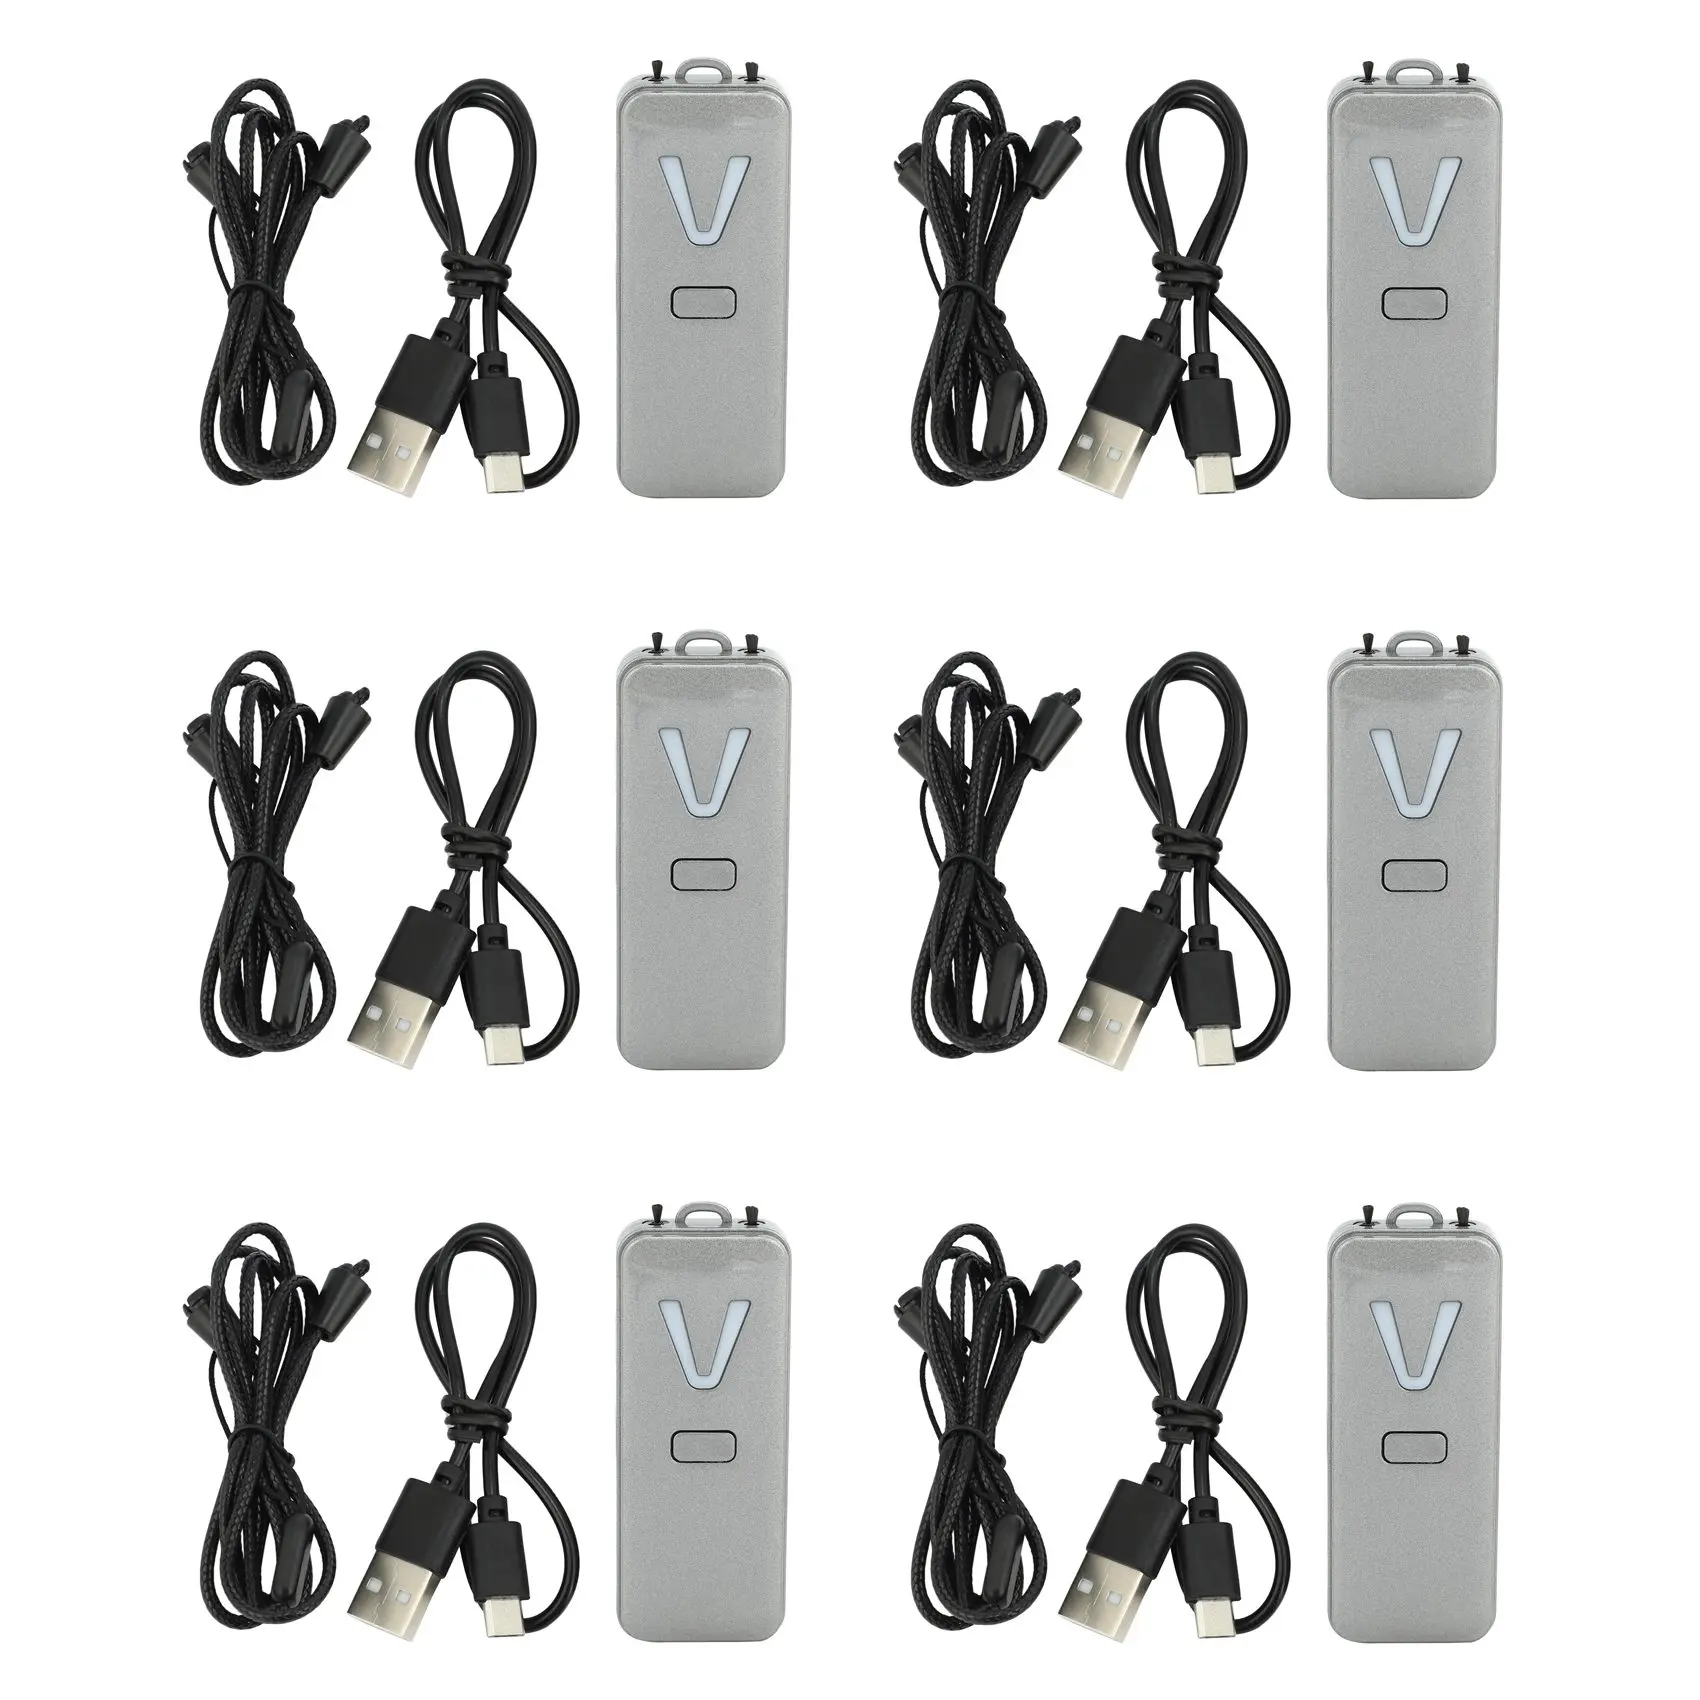 

6X Personal Wearable Air Purifier Necklace Mini Portable Air Freshener Ionizer Negative Ion Generator Silver